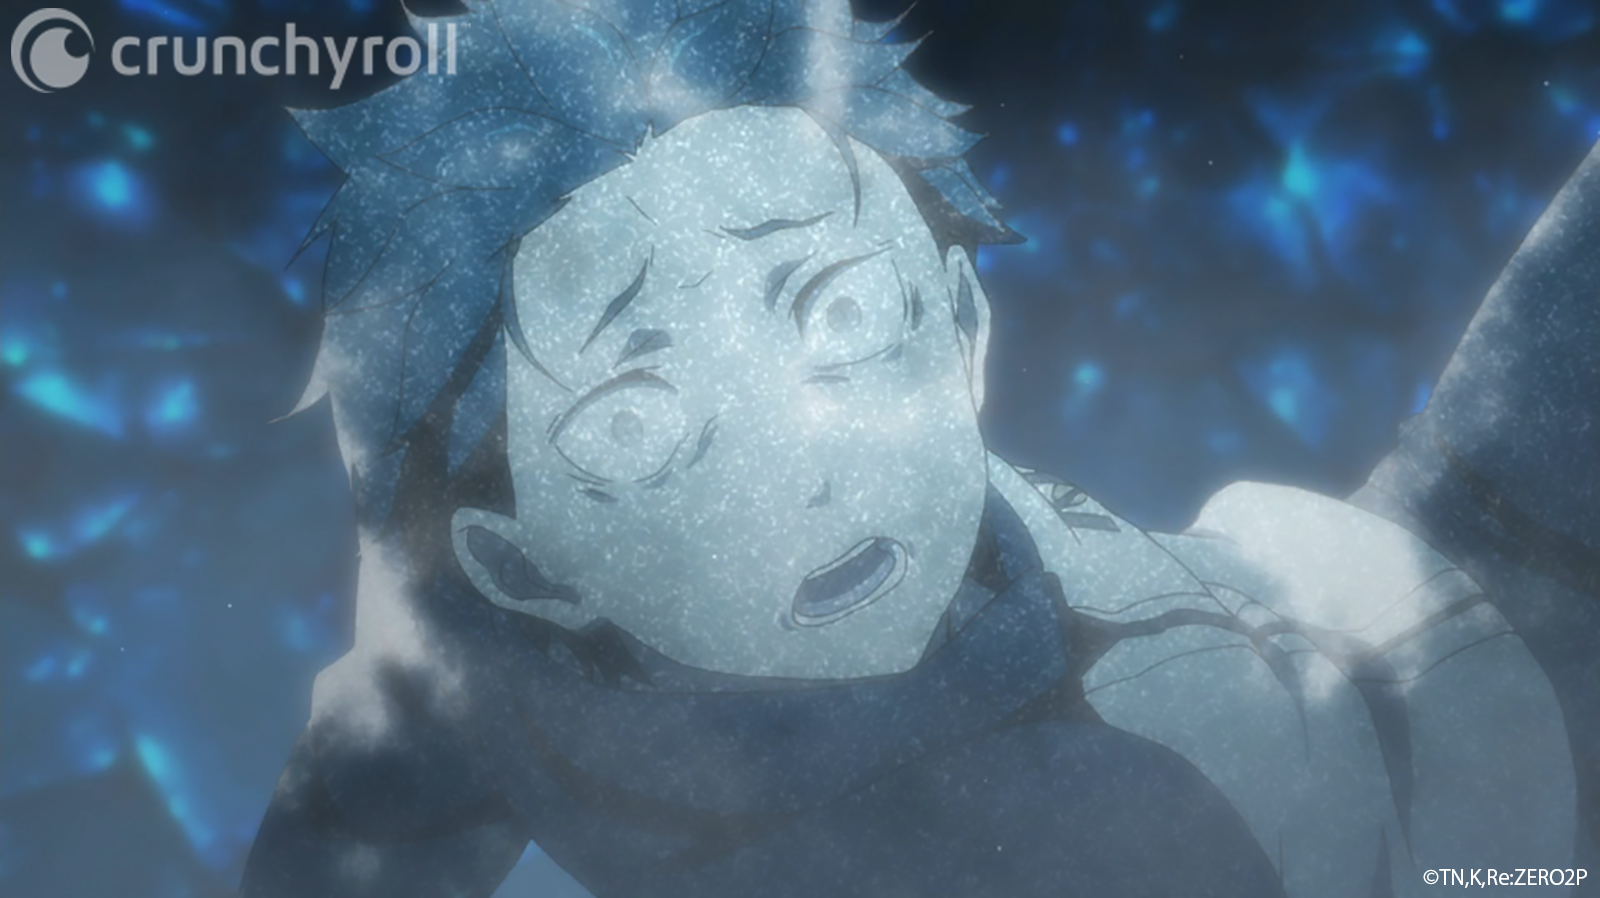 Natsuki Subaru is frozen solid by an unseen force in a scene from the Re: ZERO -Starting Life in Another World- TV anime.